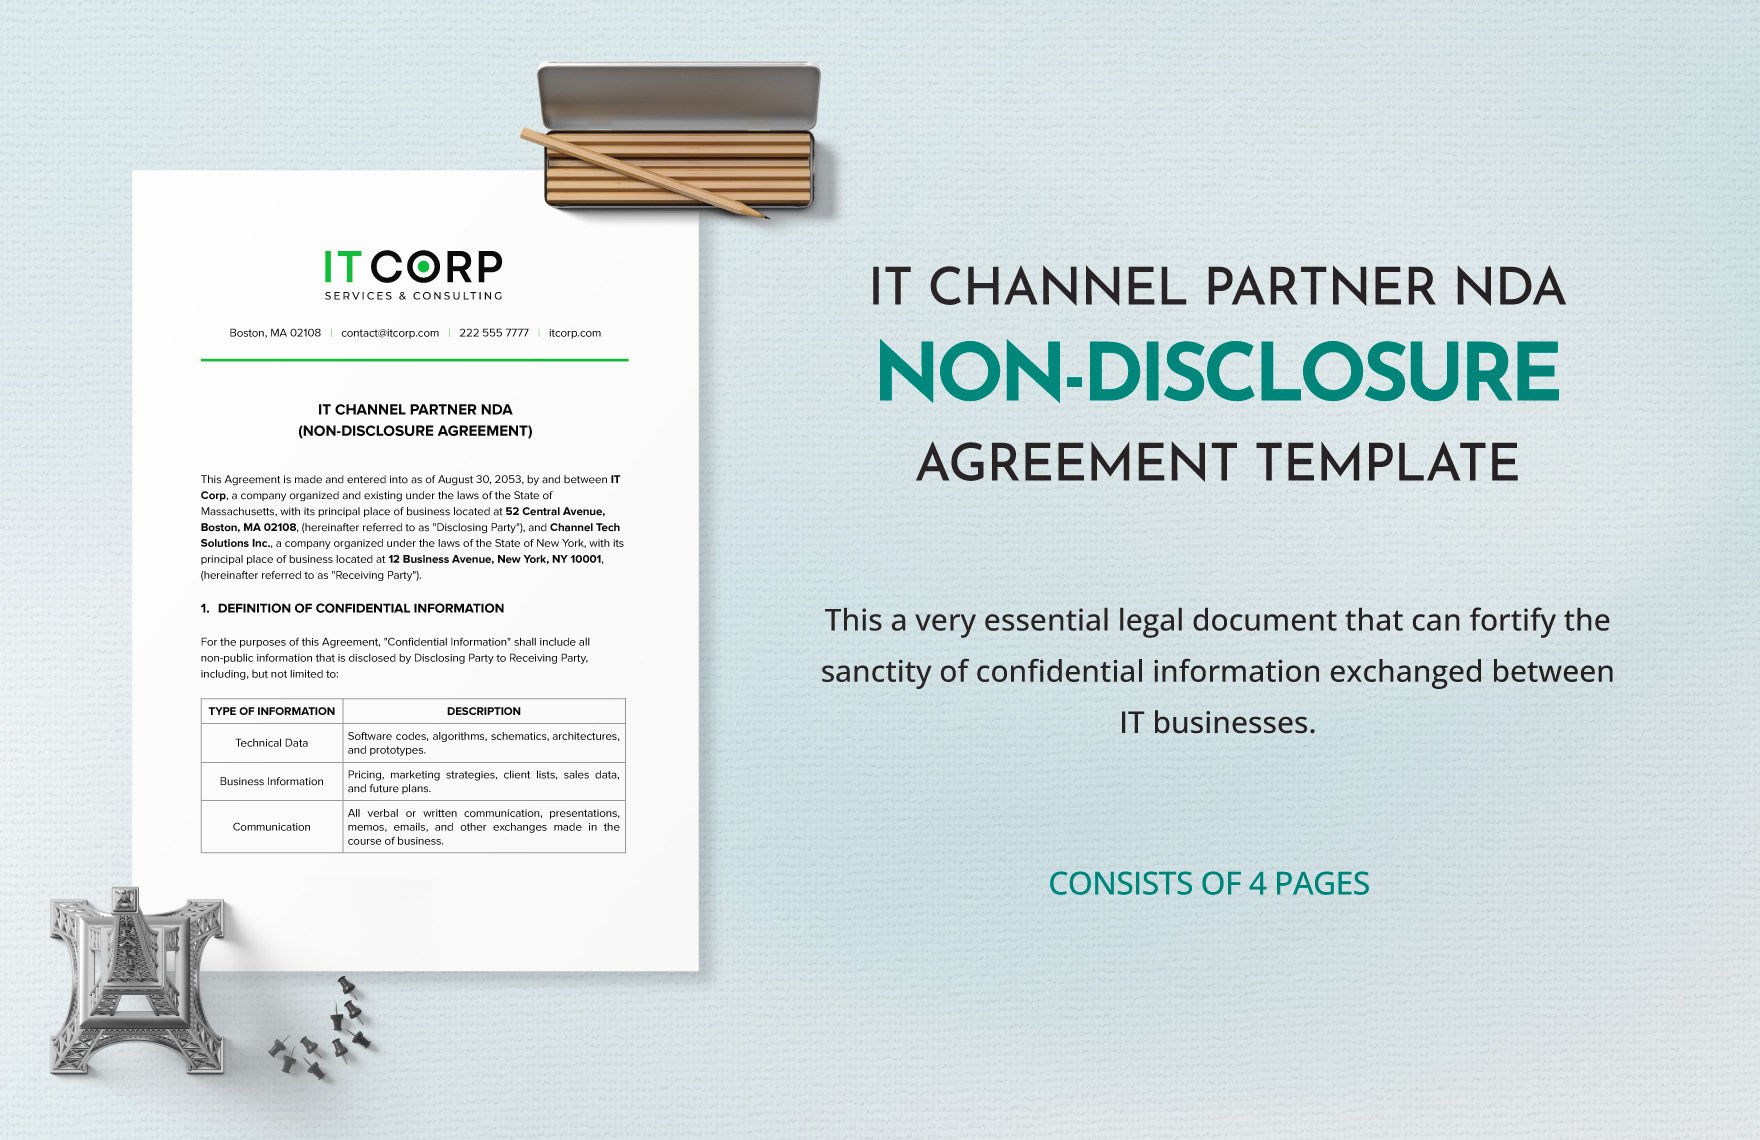 IT Channel Partner NDA (Non-Disclosure Agreement) Template